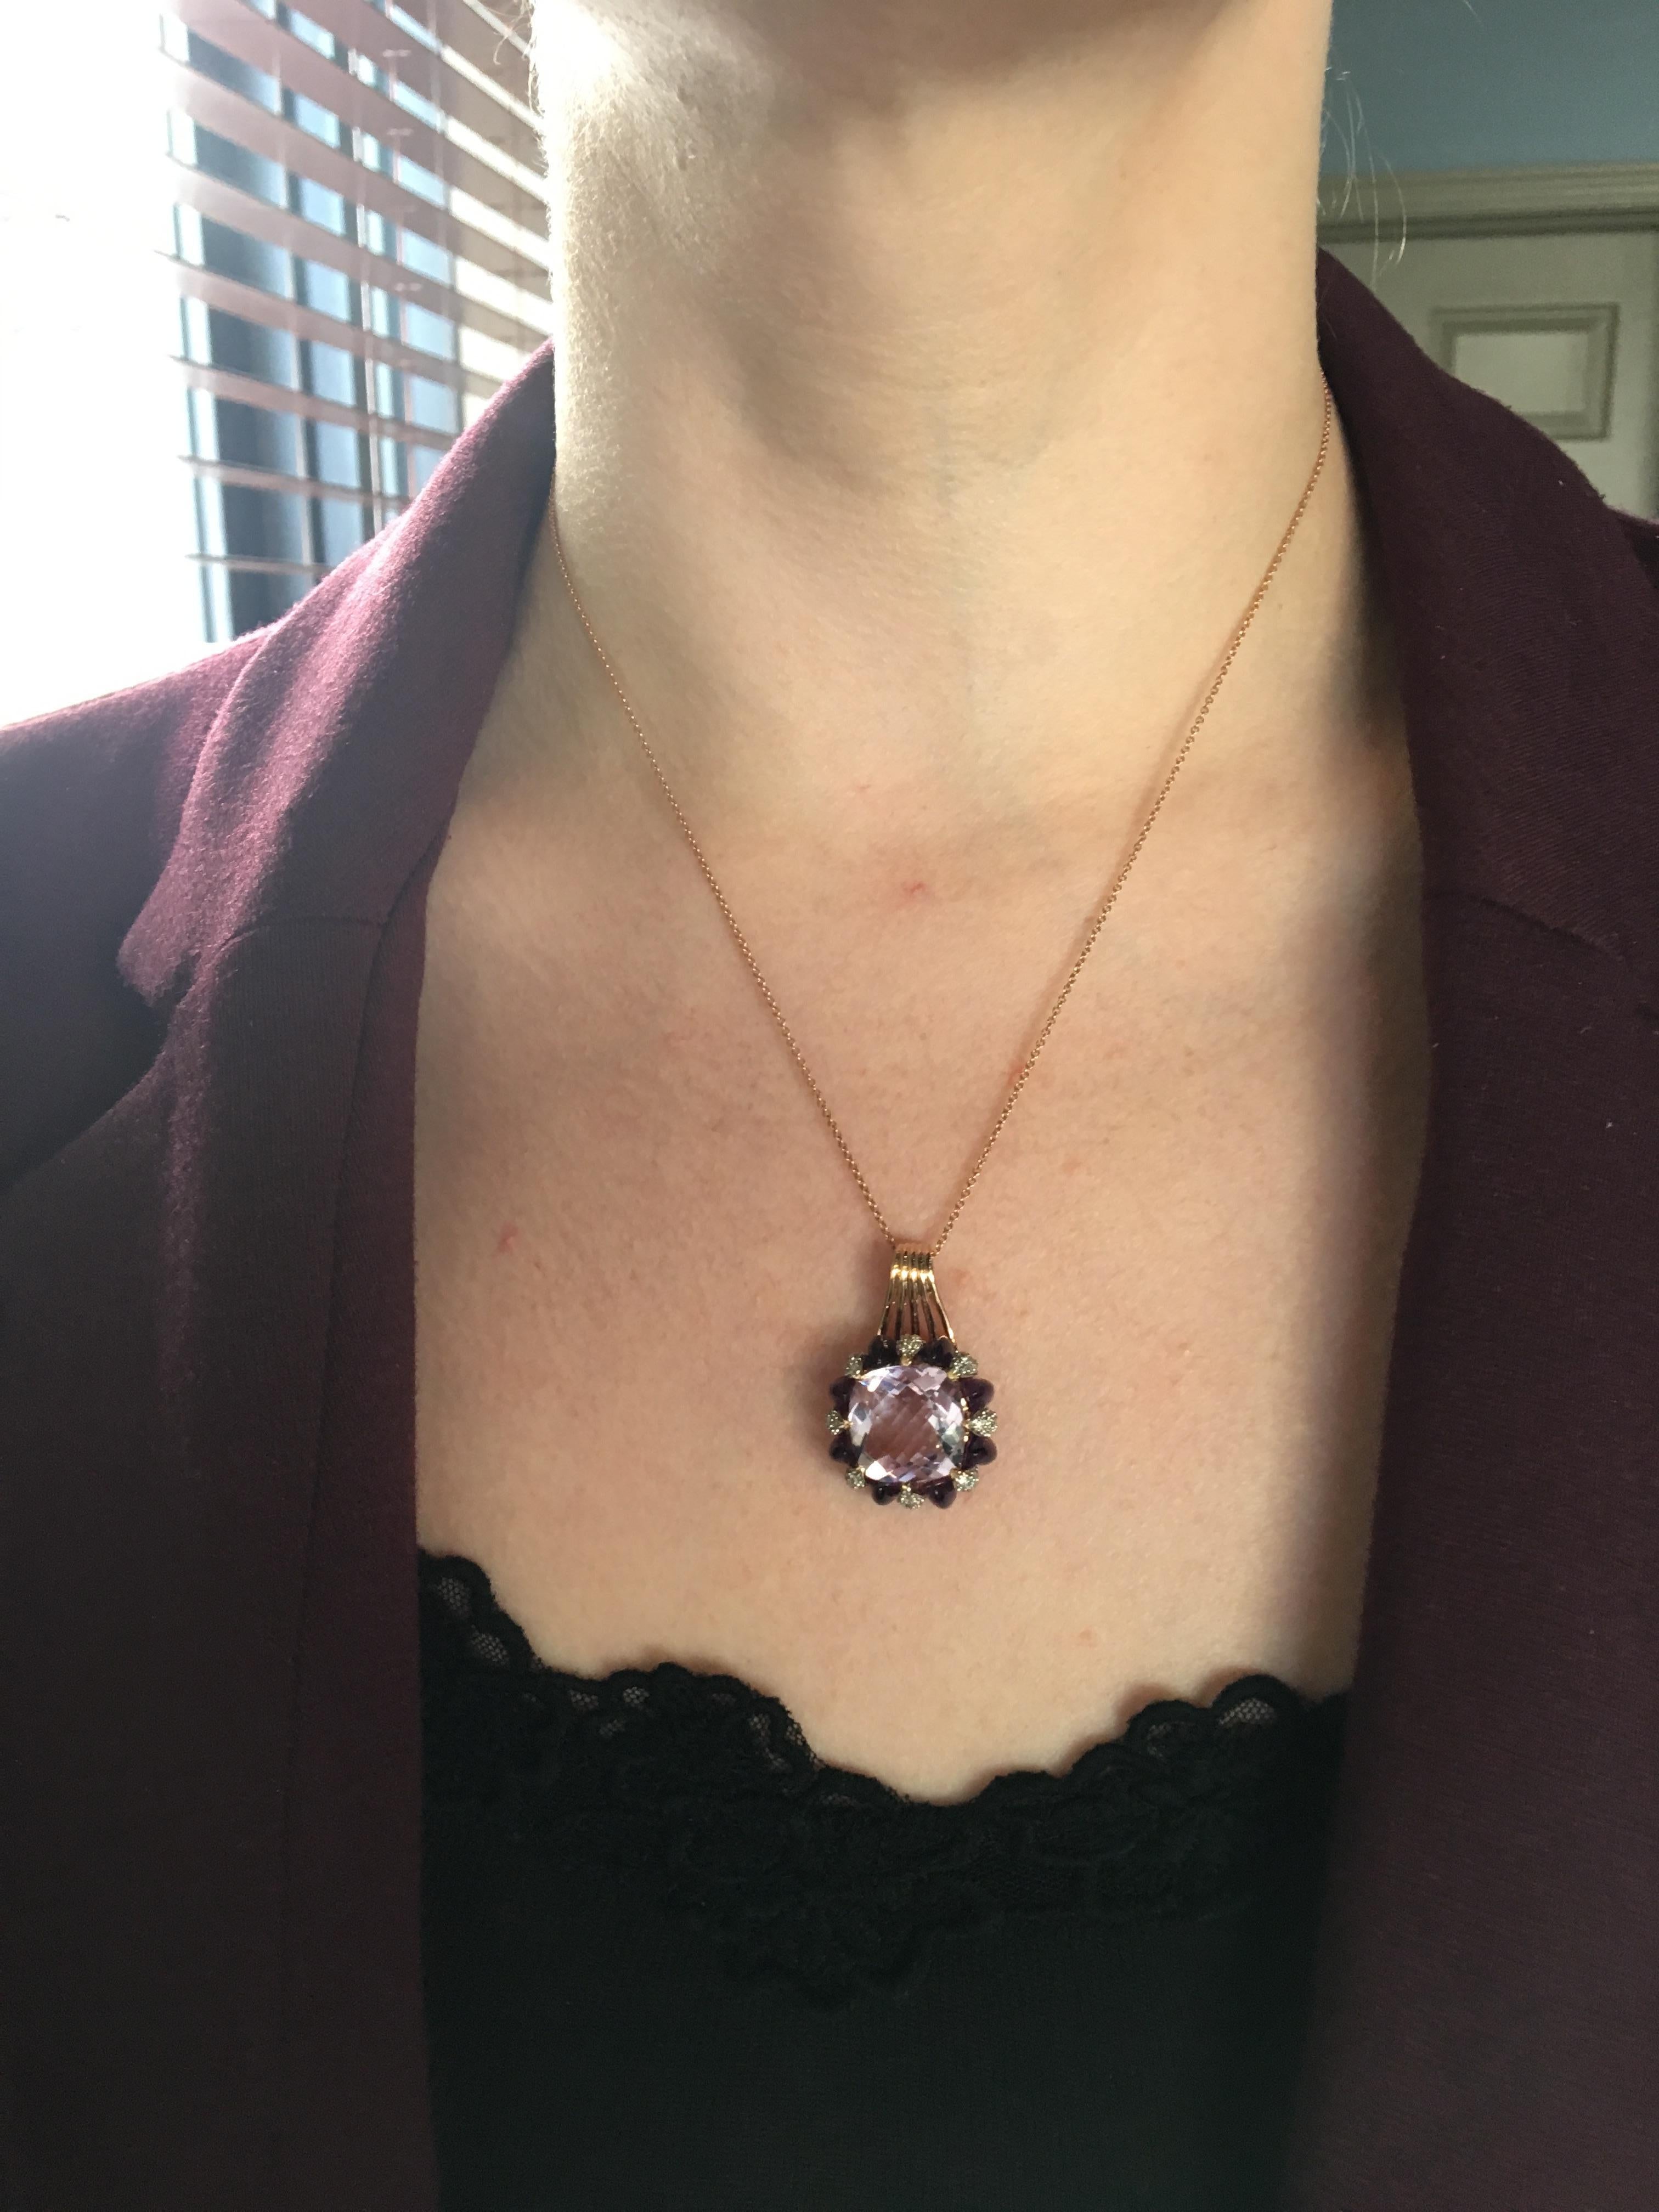 This beautiful necklace features a large checkerboard cushion shaped amethyst, surrounded by additional cabochon cut amethysts and round brilliant cut diamonds.

Designer: LeVian
Gemstone: Diamond and Amethyst
Diamond Carat Weight: Approximately